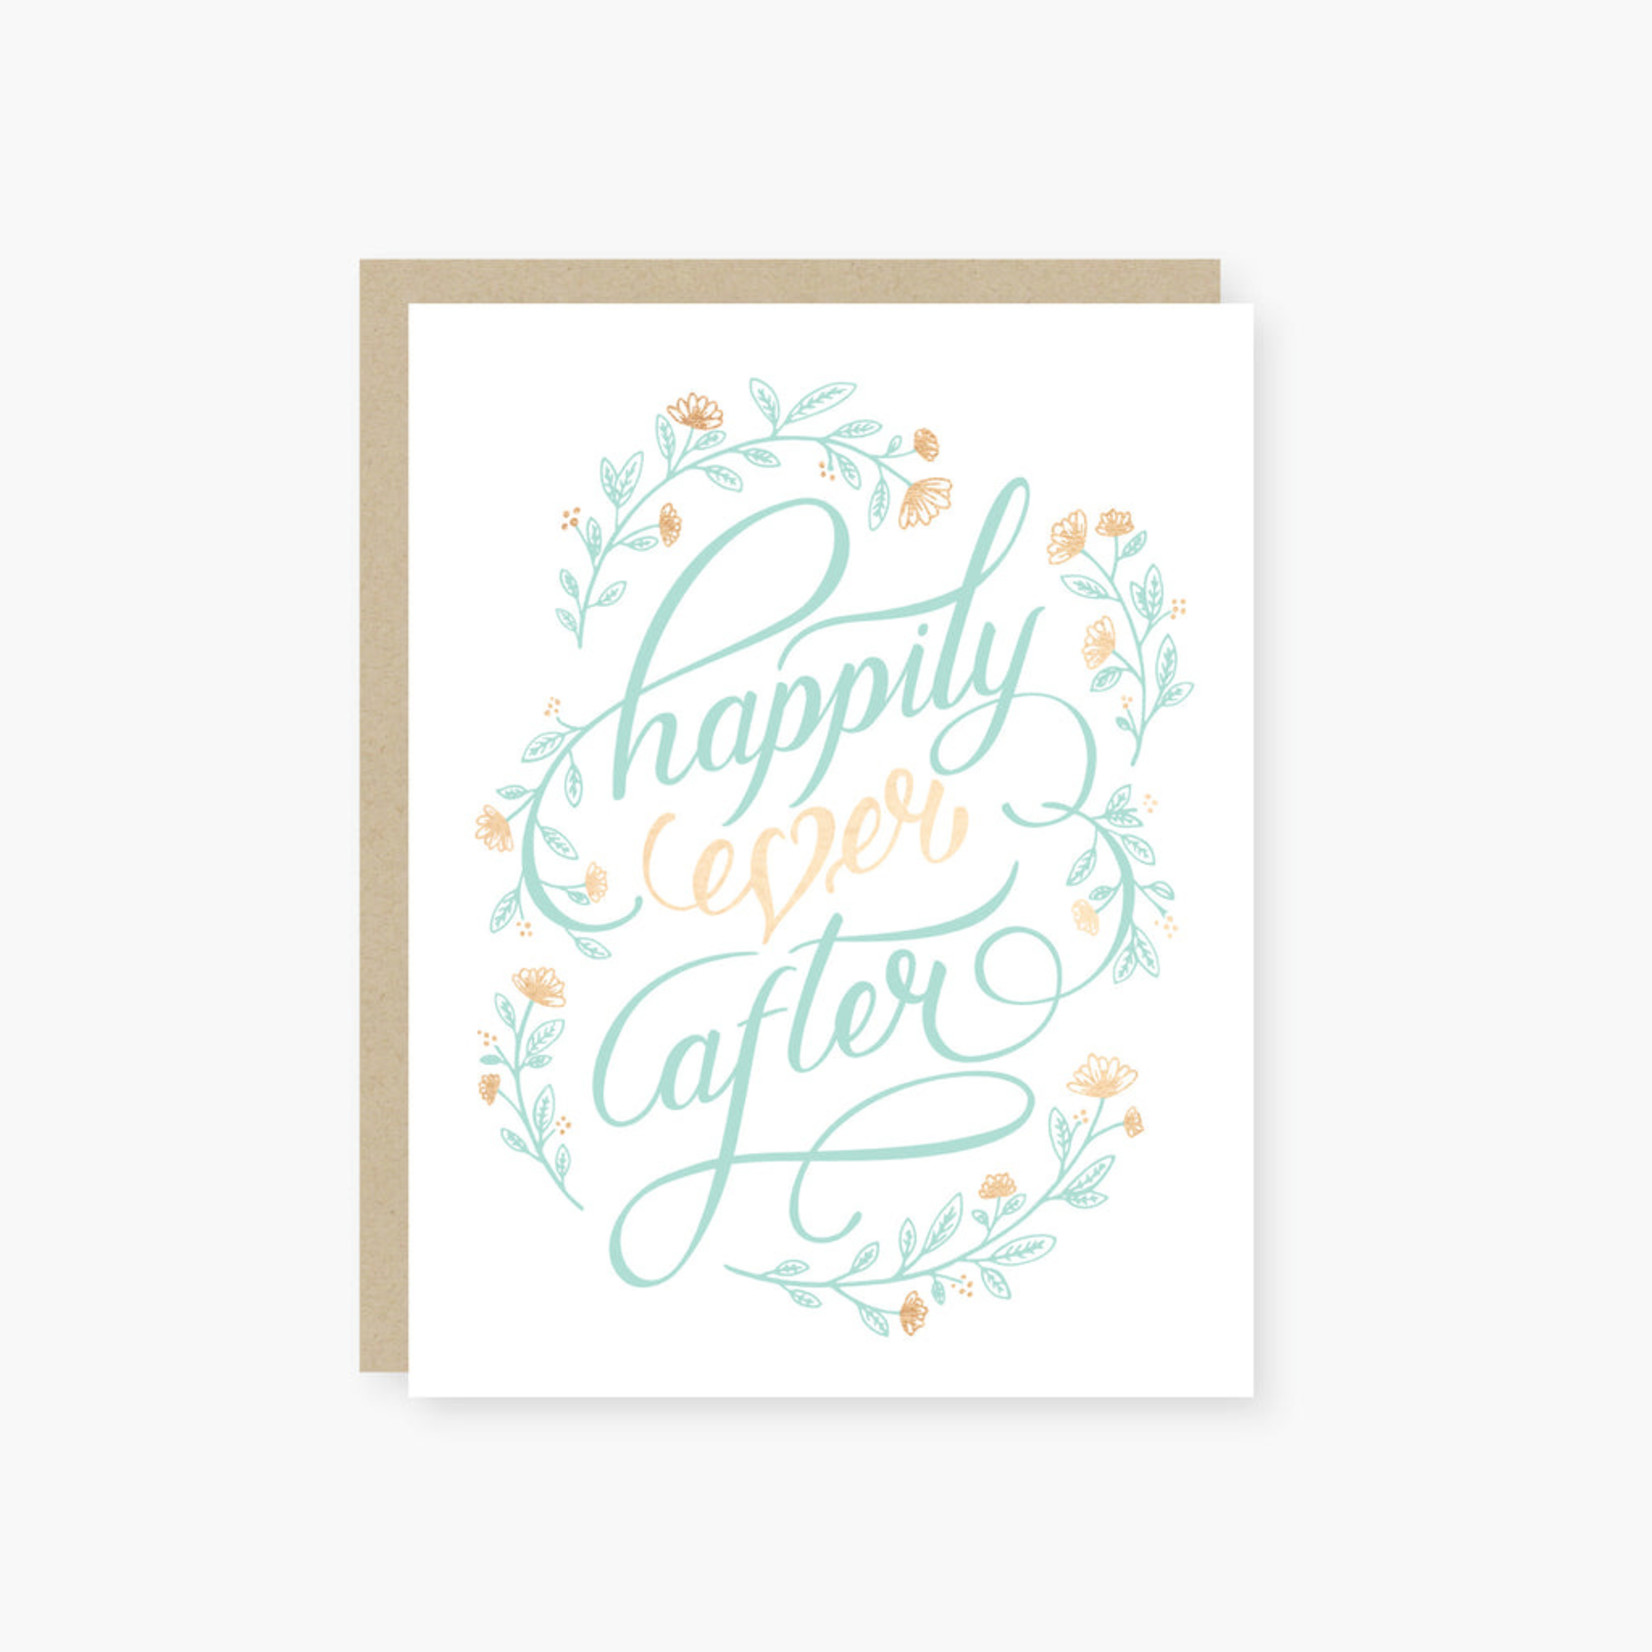 2021 Co 2021 Co - Wedding Card - Happily Ever After